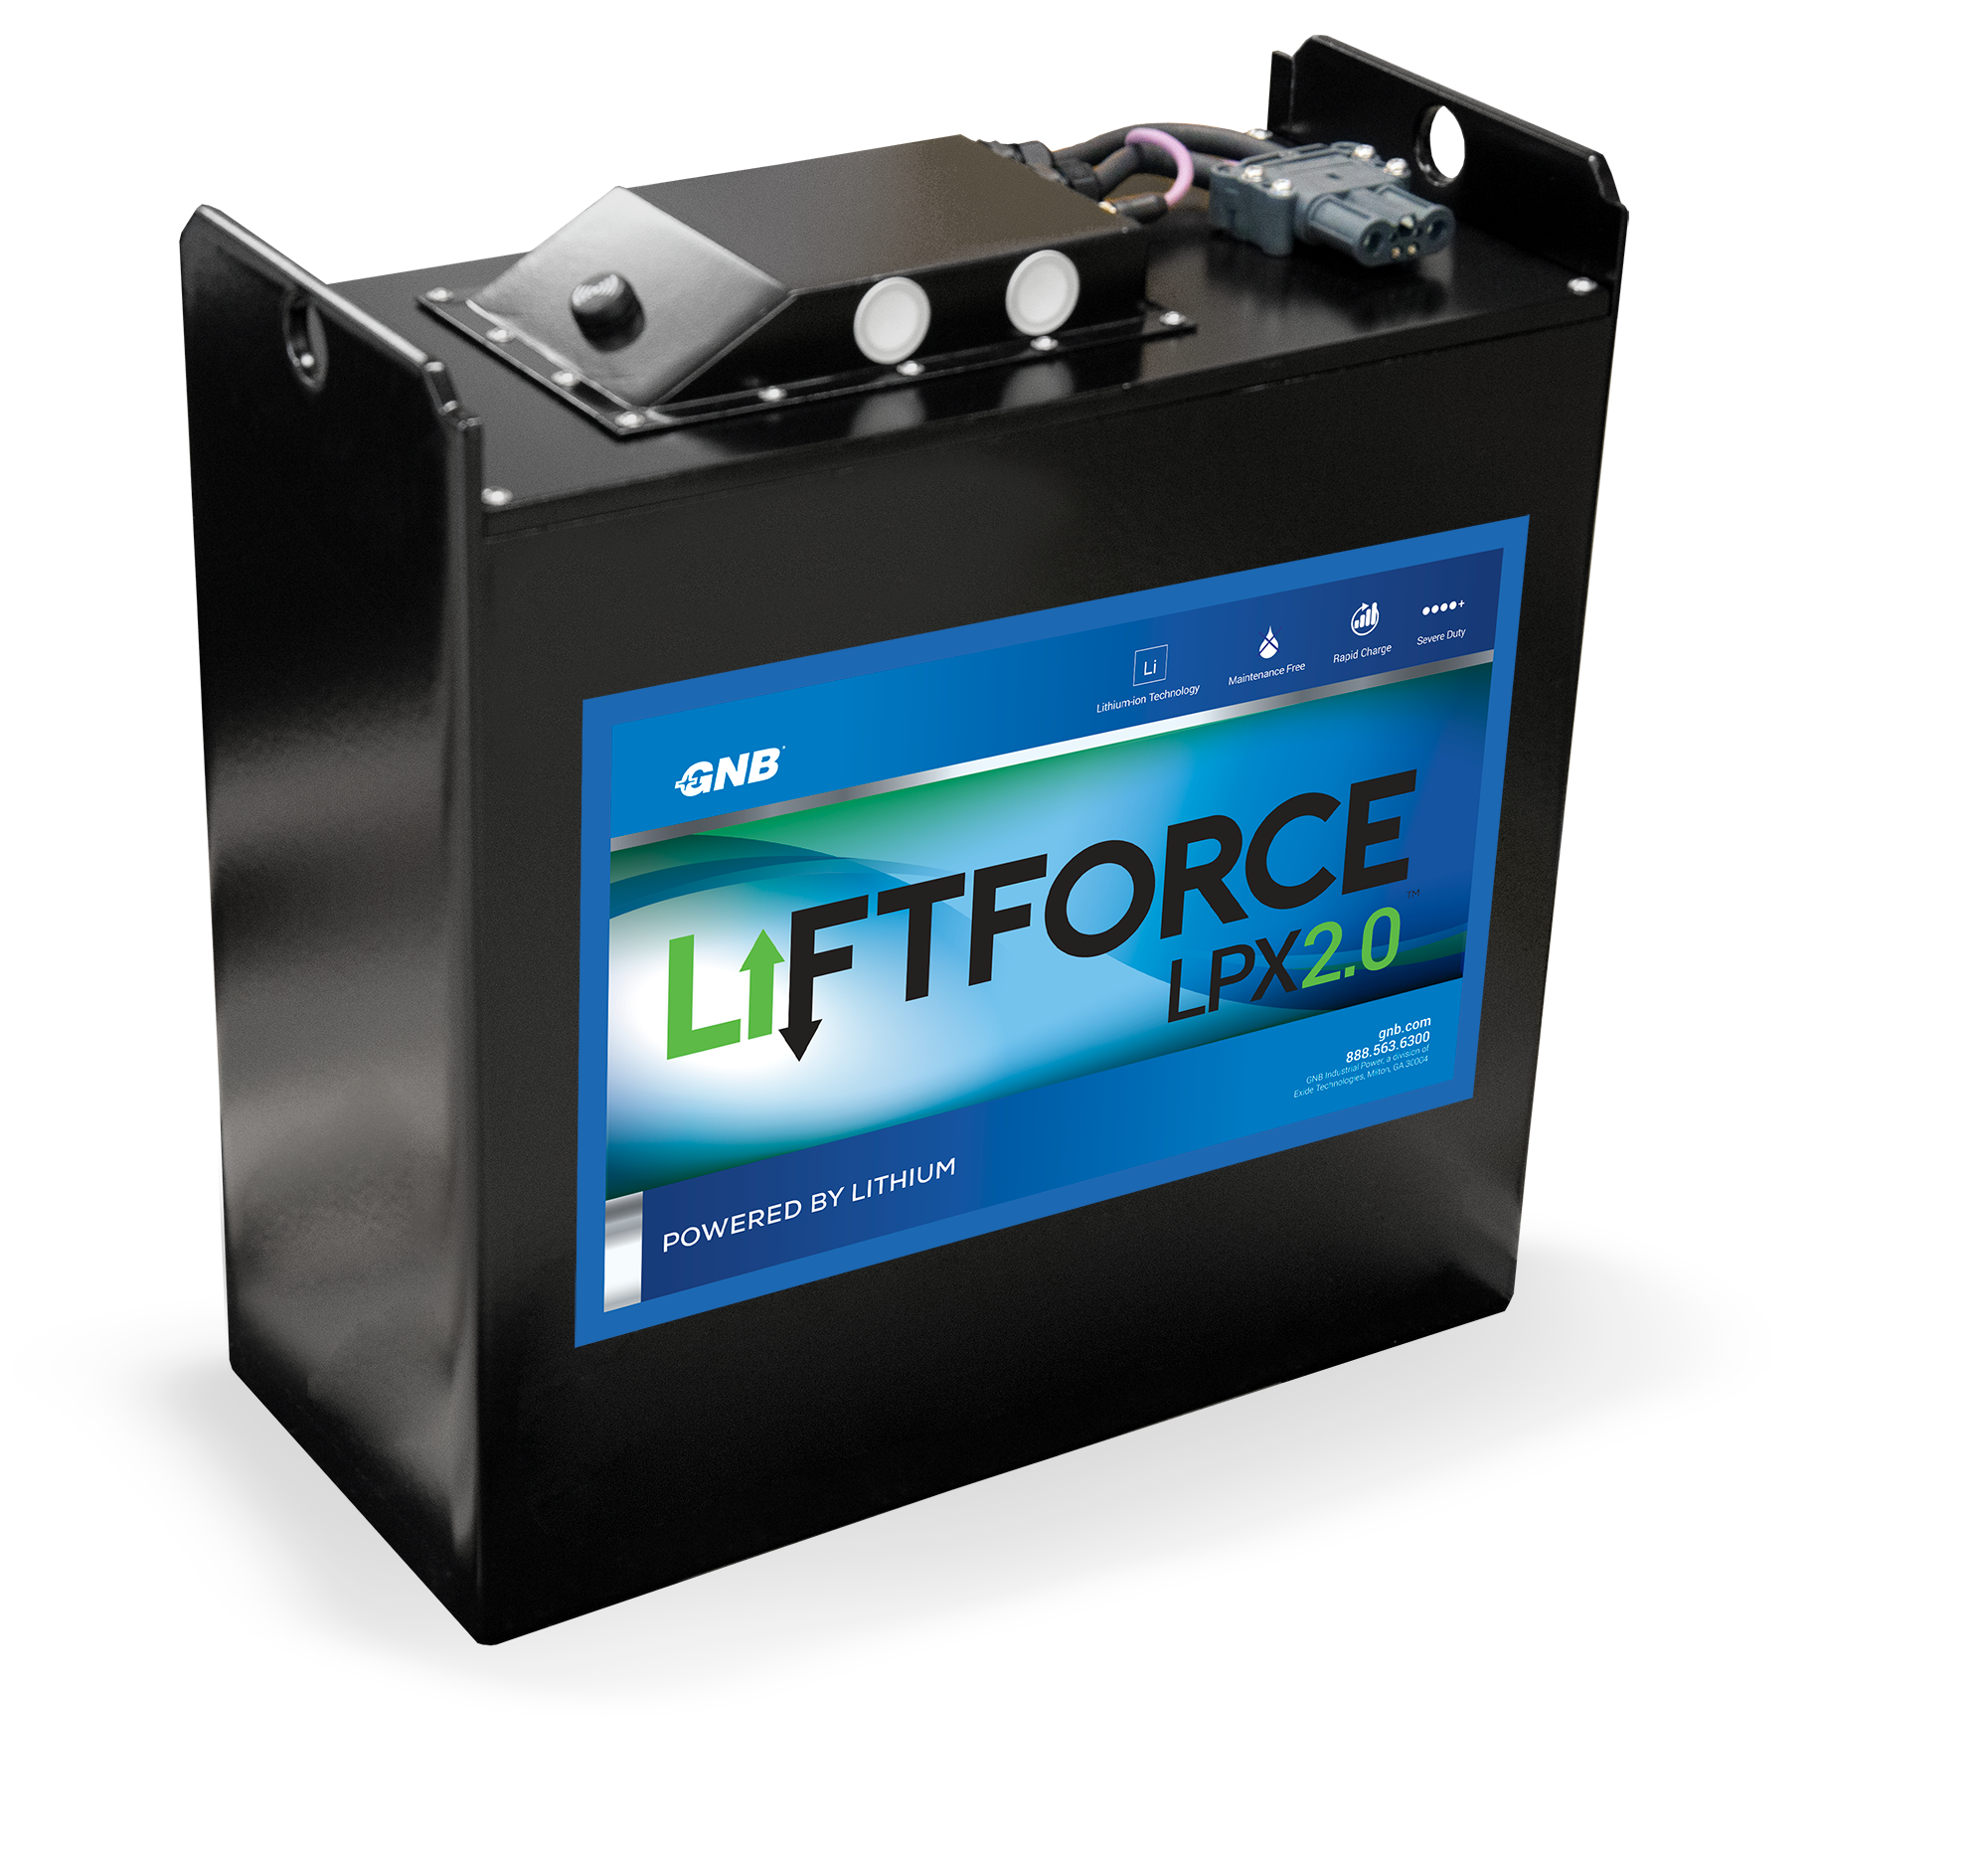 The GNB LiFTFORCE LPX 2.0 has greater energy density, improved integration and communication capabilities and a wider application range – all at a lower cost.